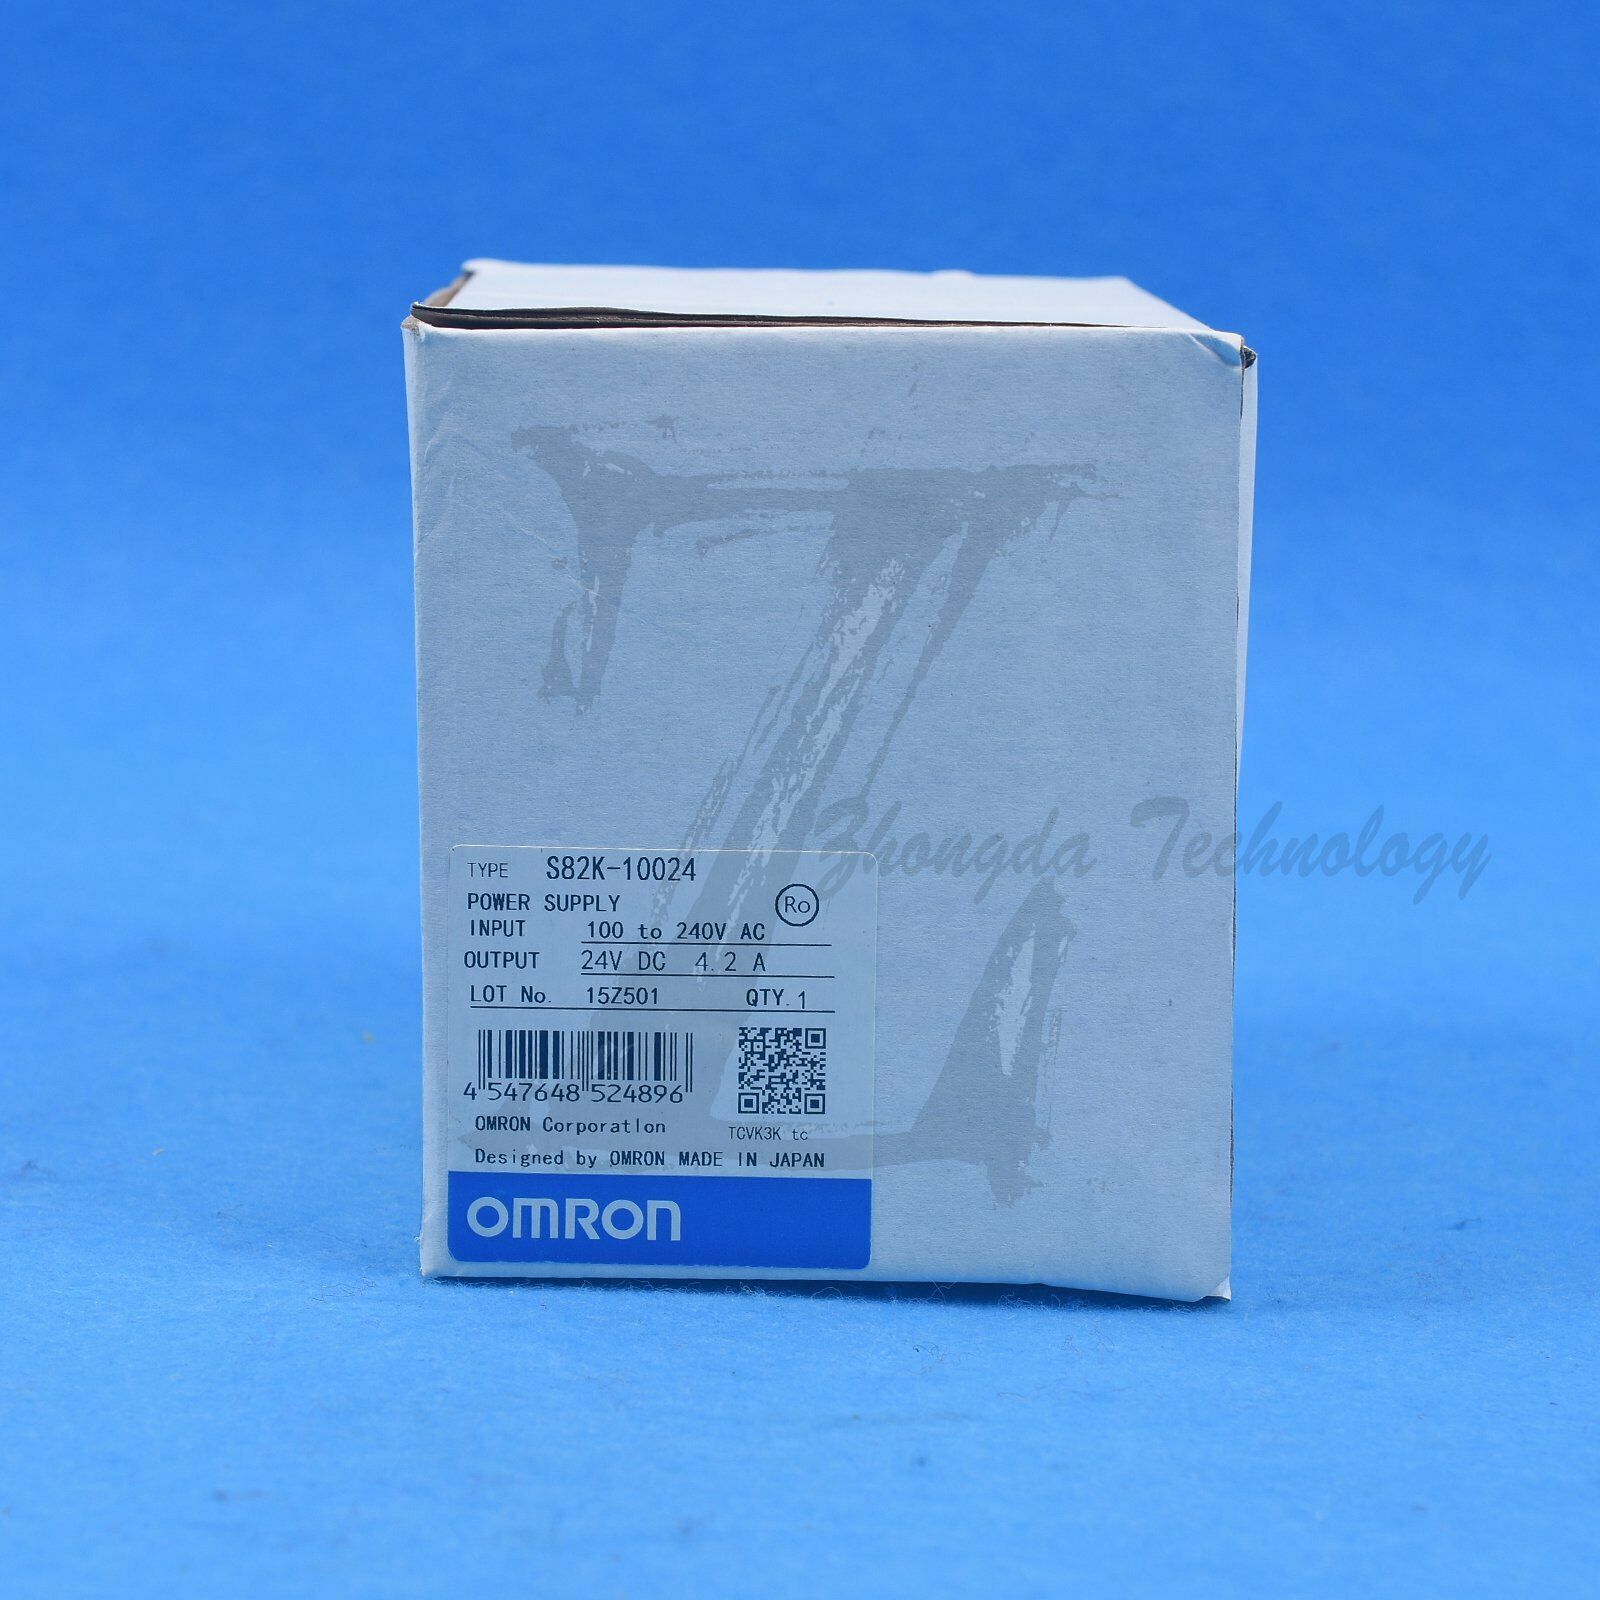 1PC New Omron Power Supply S82K-10024 24VDC 4.2A One year warranty KOEED $101-200, 90%, import_2020_10_10_031751, OMRON, PLC, S82K